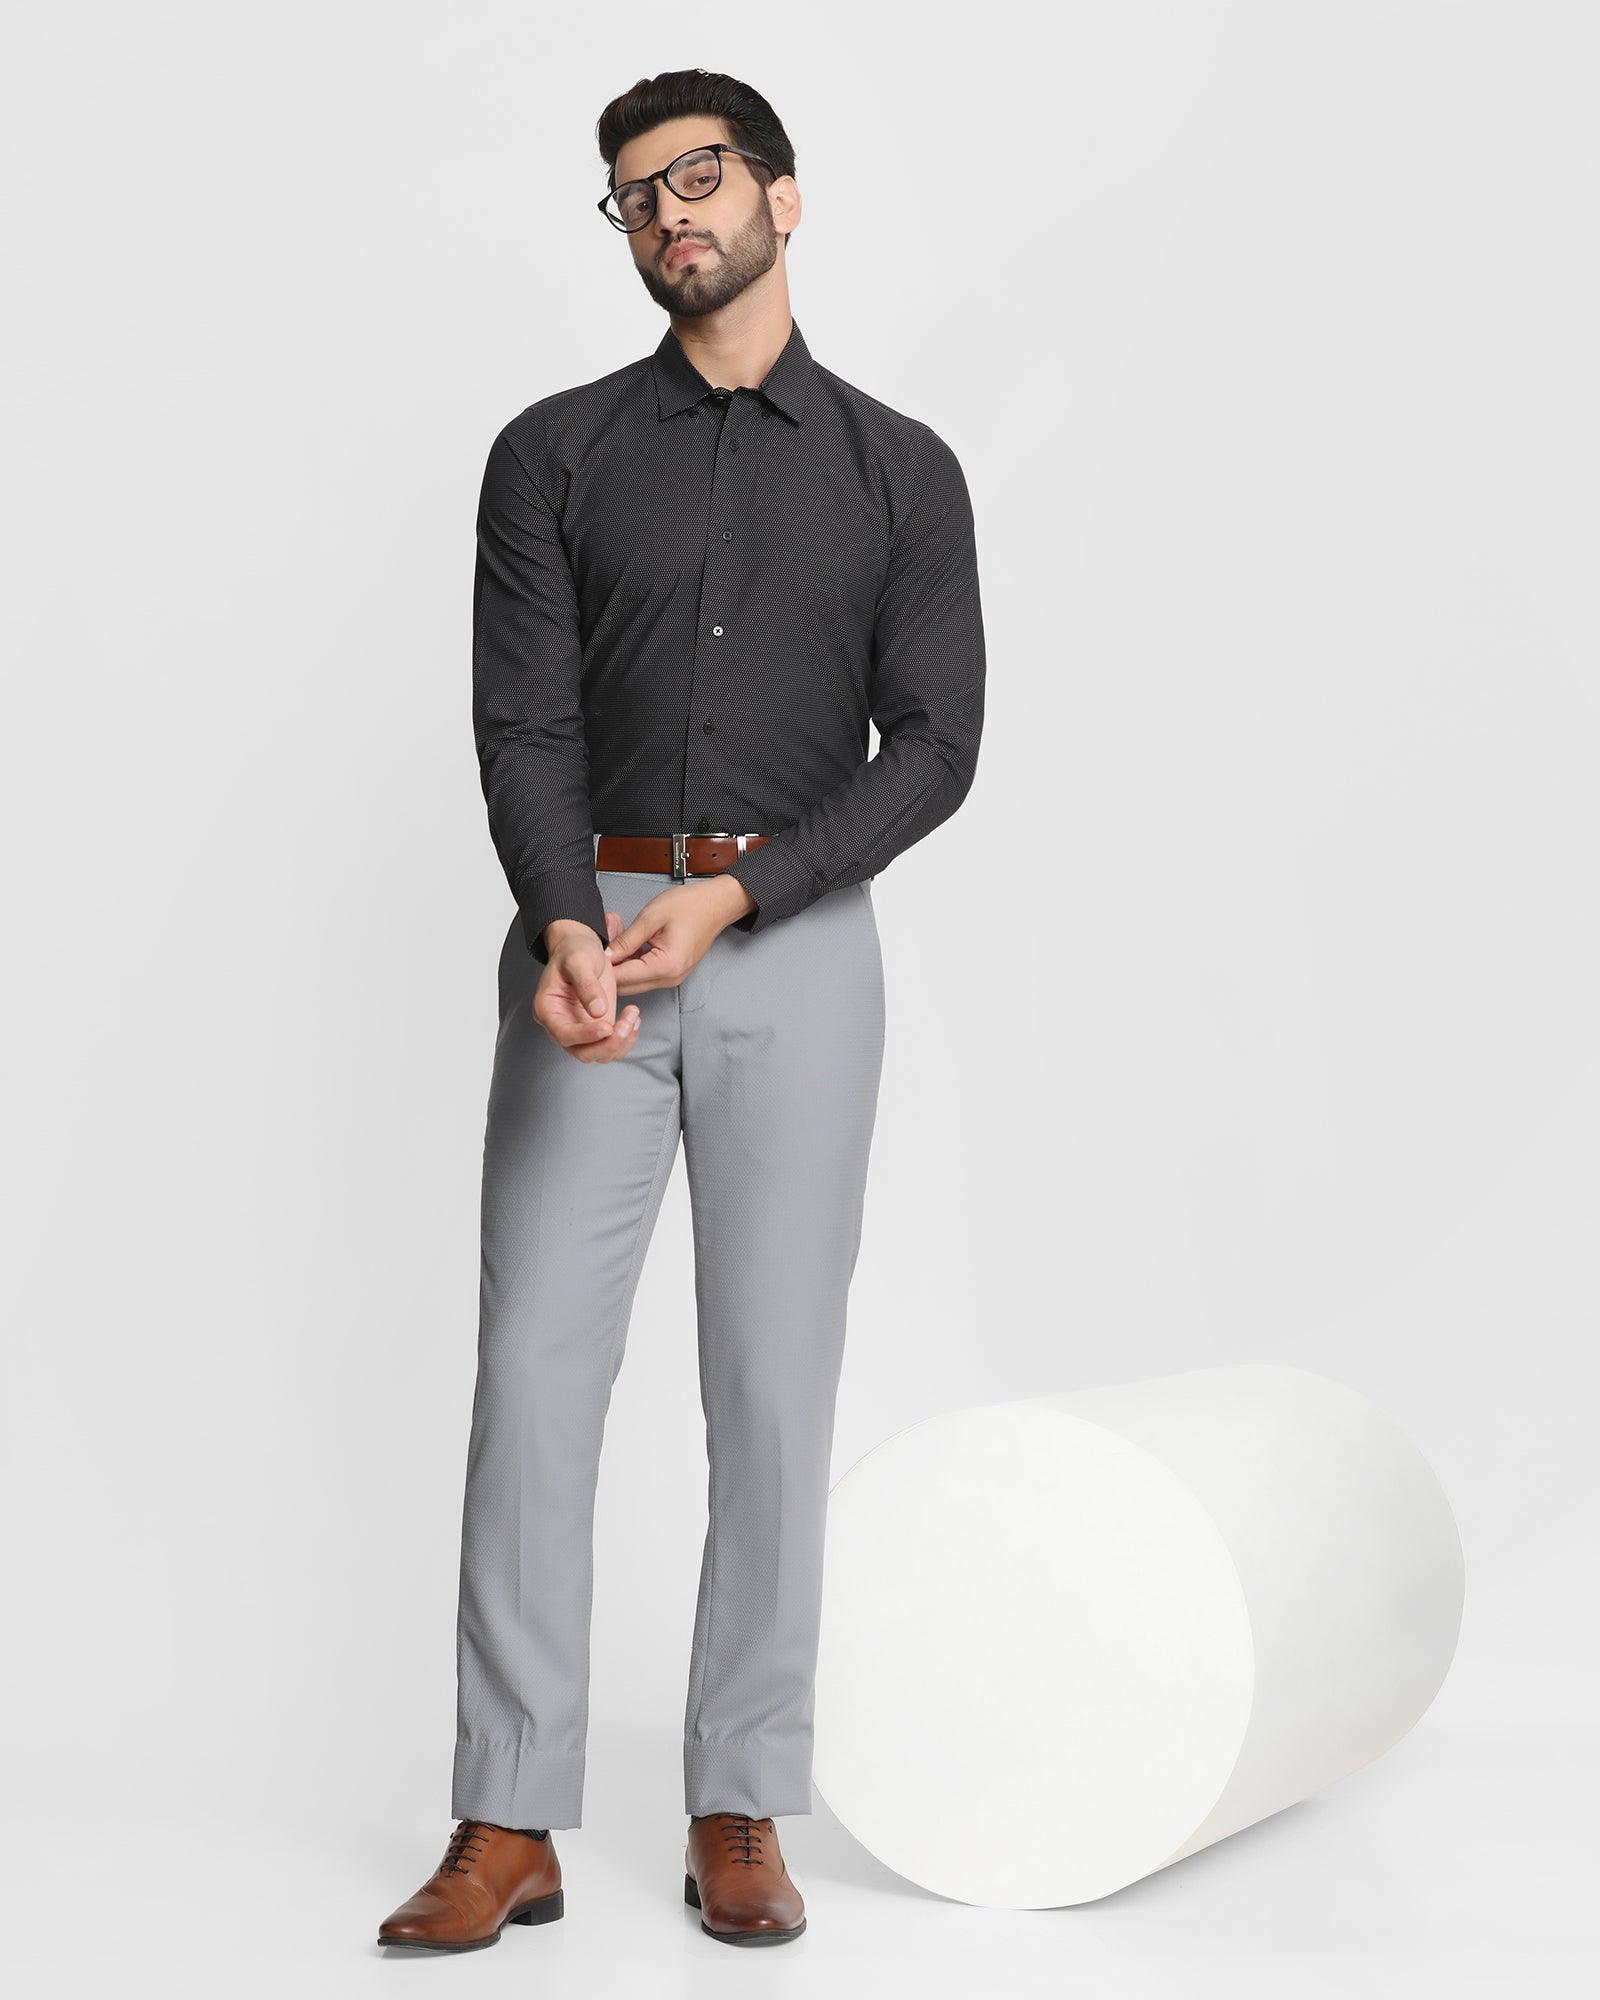 7 Pants Colors To Wear With A Black Shirt And Brown Shoes | Blue shirt  black pants, Black pants brown shoes, Grey pants men